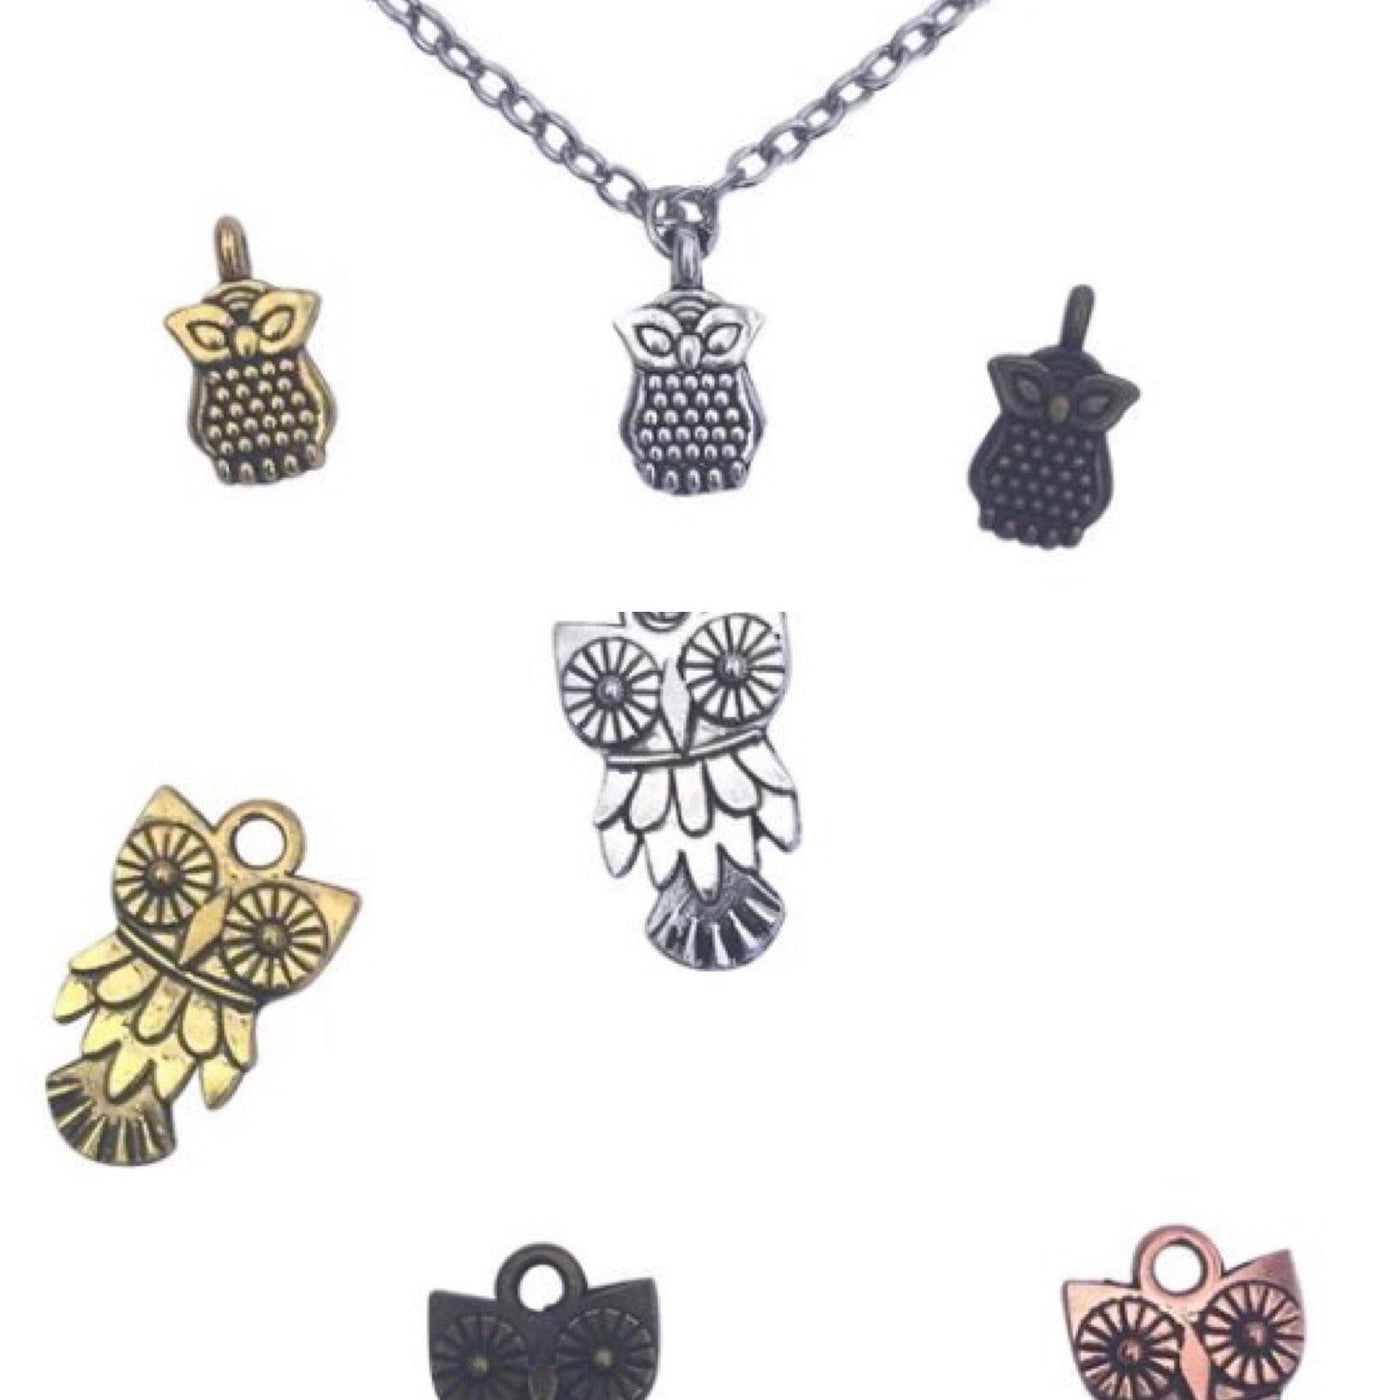 "Owl" Always Love you - Owl Necklace Gift - Accessories - dalia + jade 